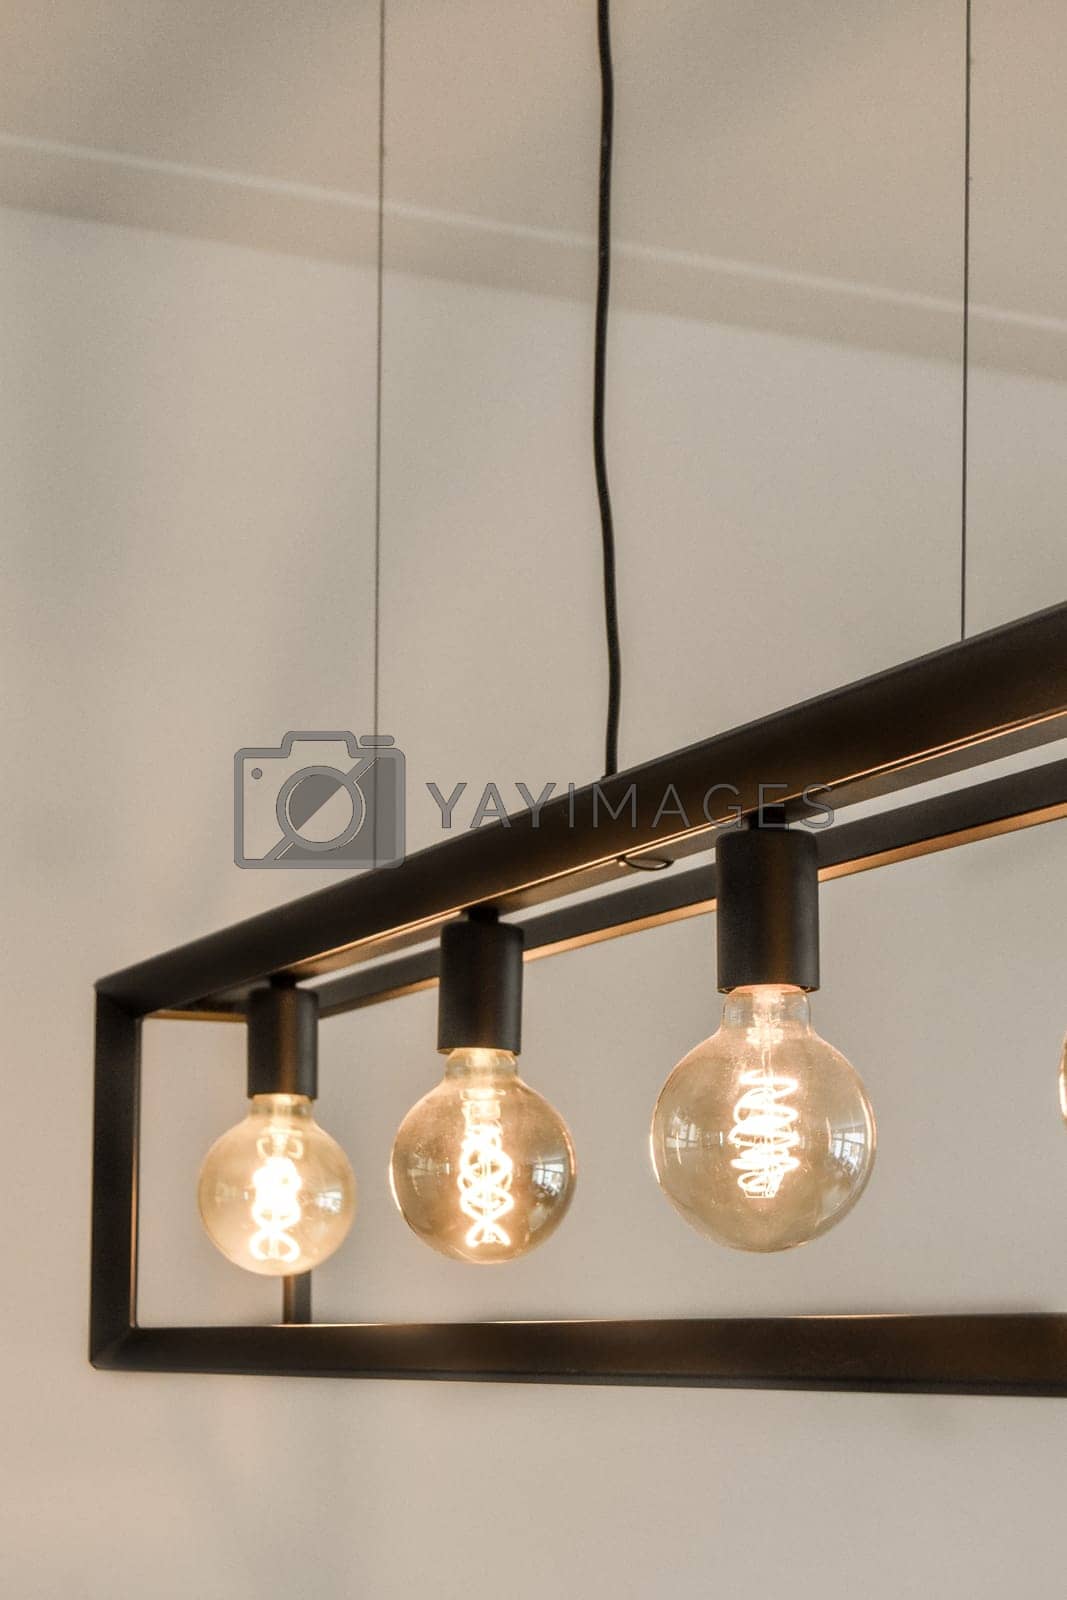 Royalty free image of the cesto collection of edison lights by casamedia